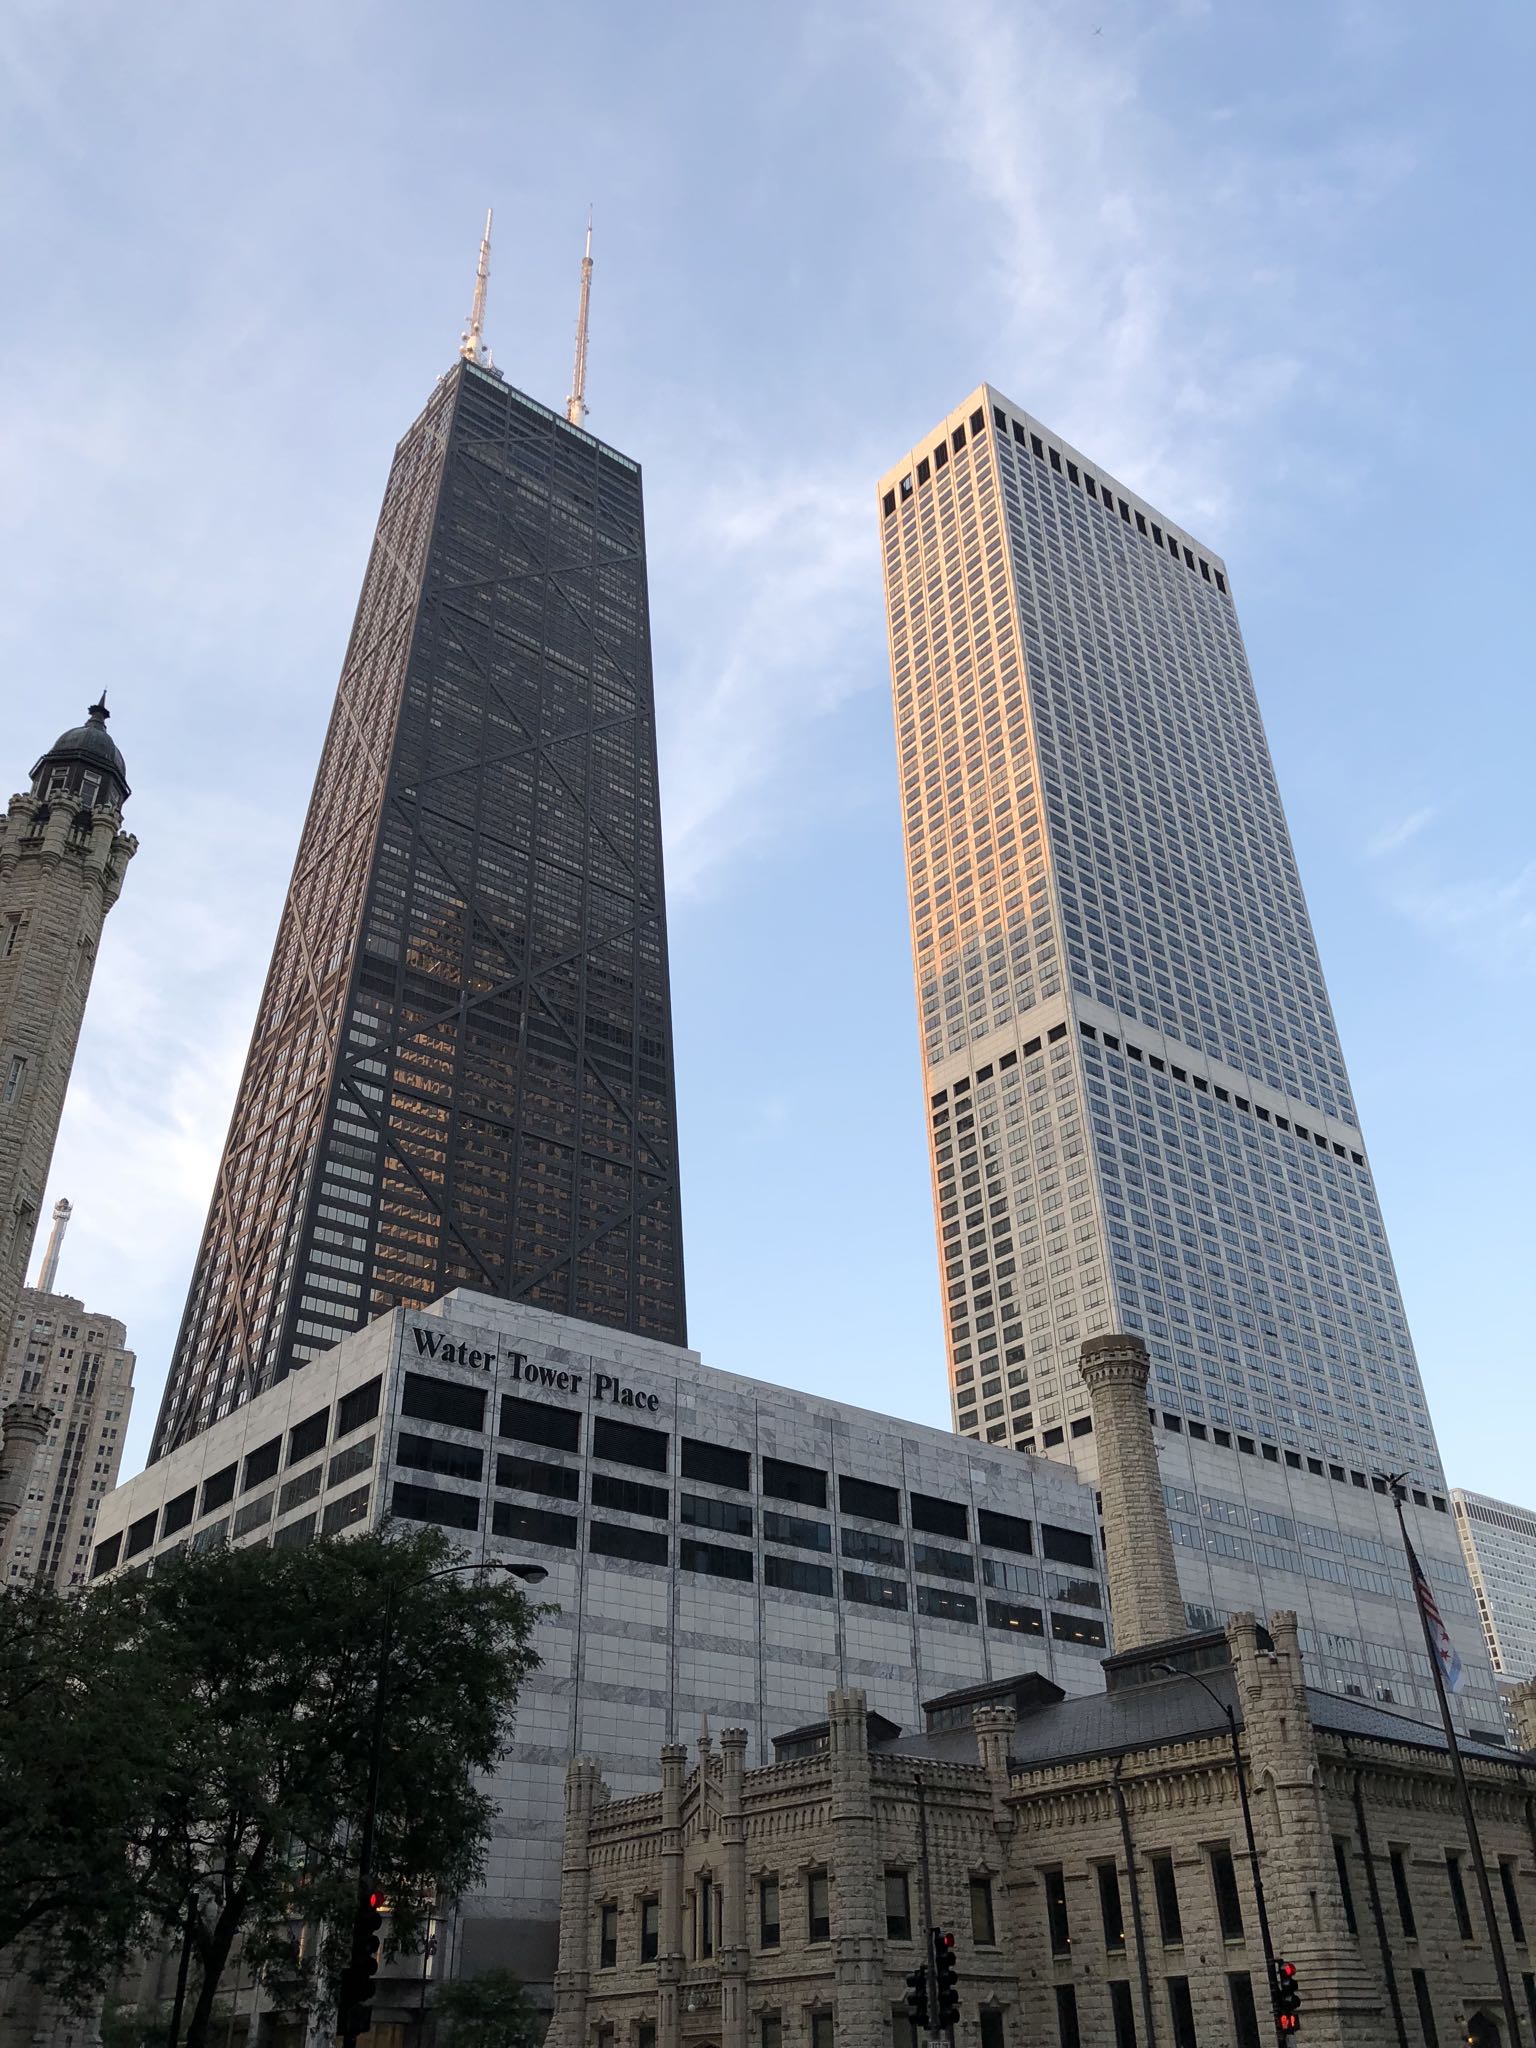 Photo 20 of 25 from the album Highlights Chicago 2018.